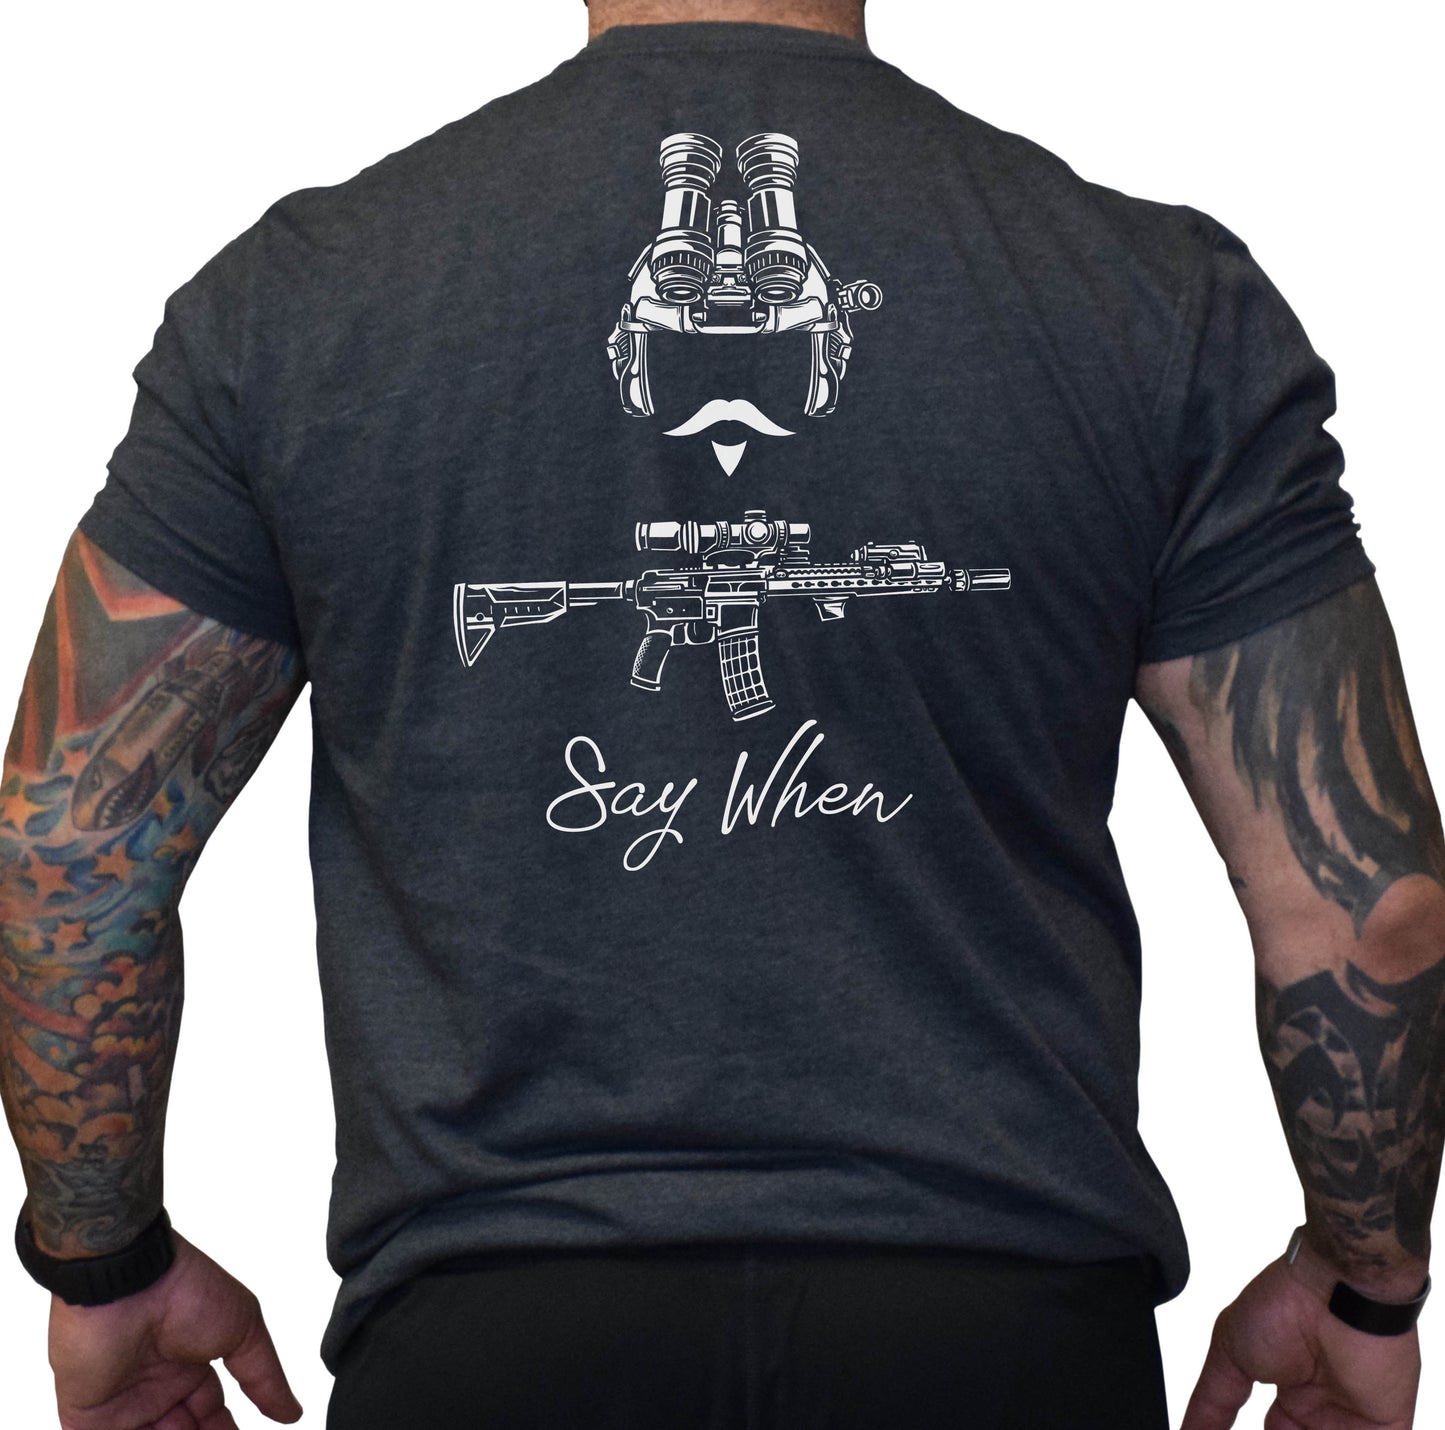 The Gentleman Operator  "I'm your huckleberry" Front and back logo